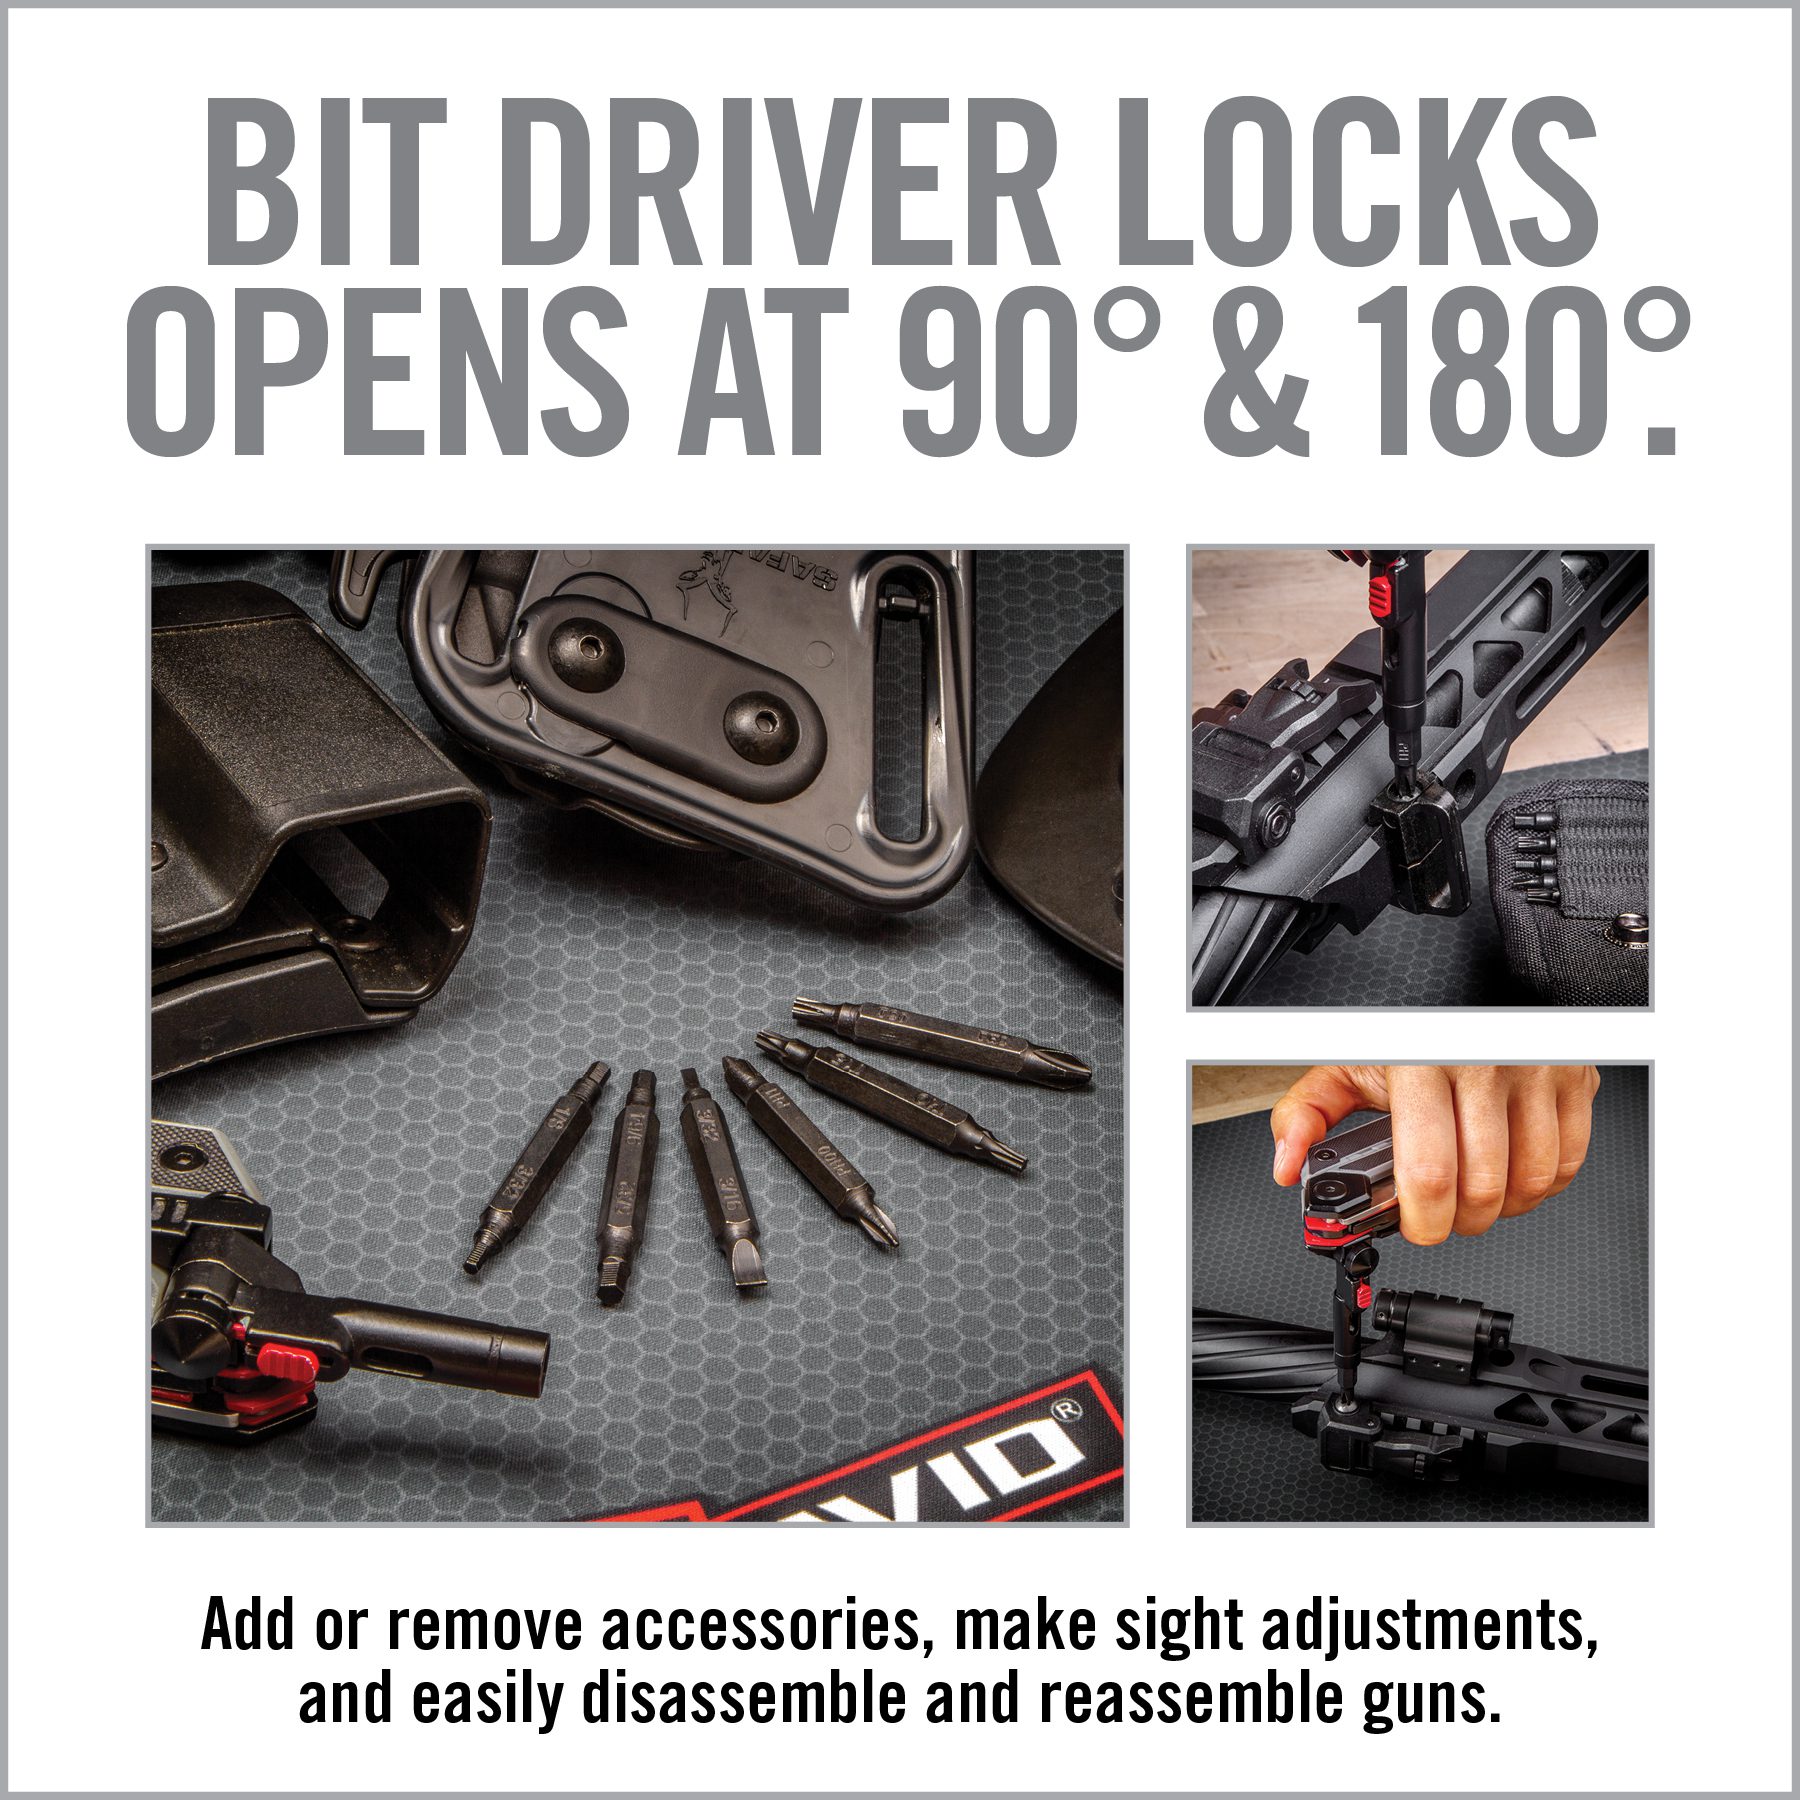 an advertisement for a gun shop with pictures of guns and accessories